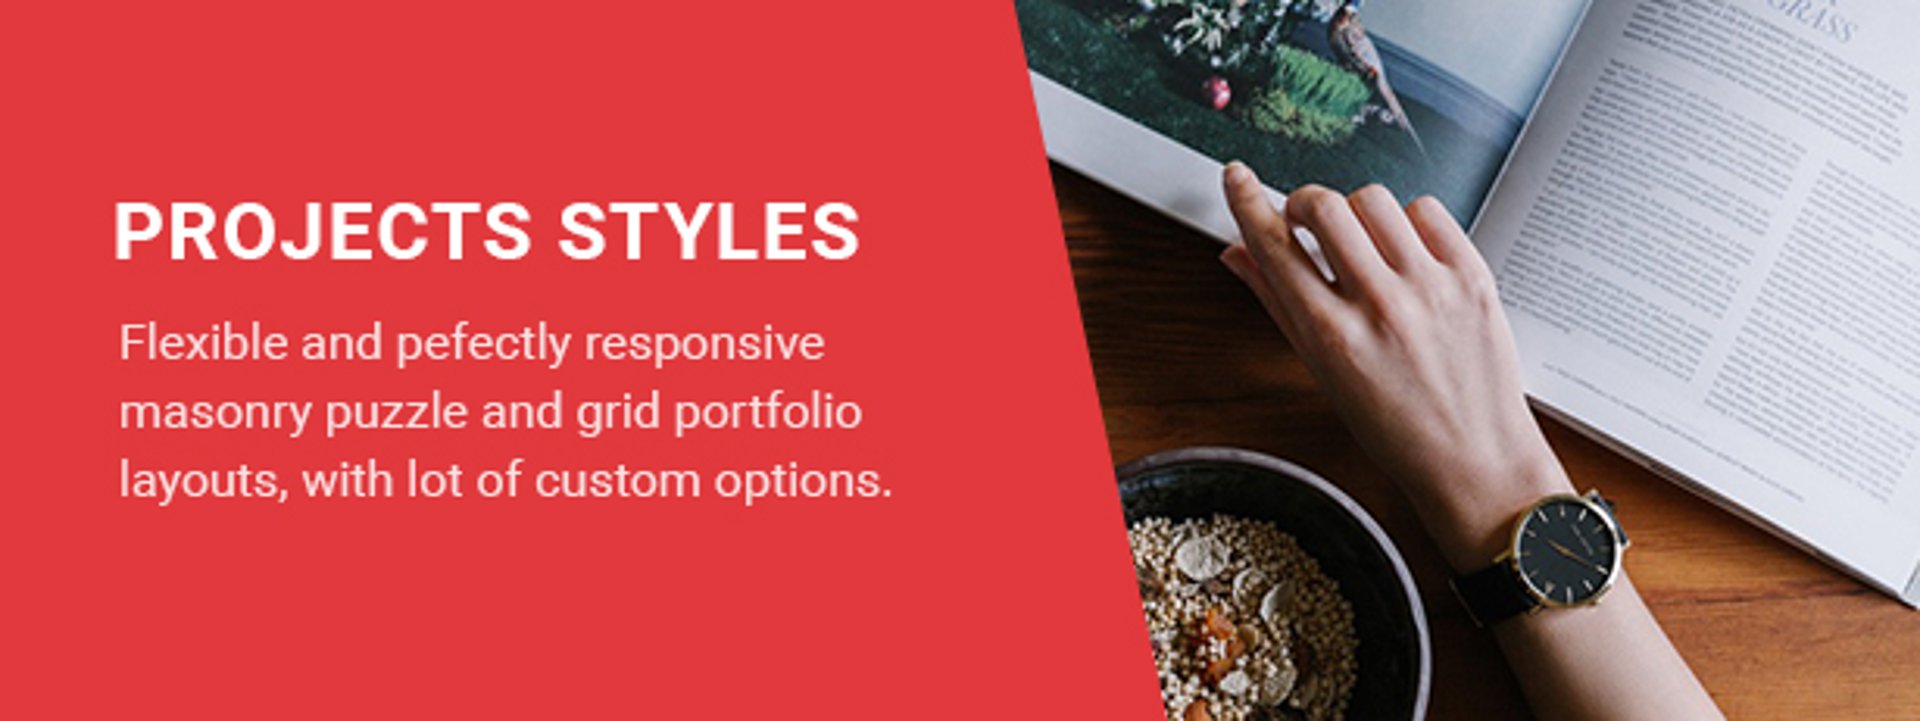 Top Magazine - Blog and News WordPress Theme - Projects Styles